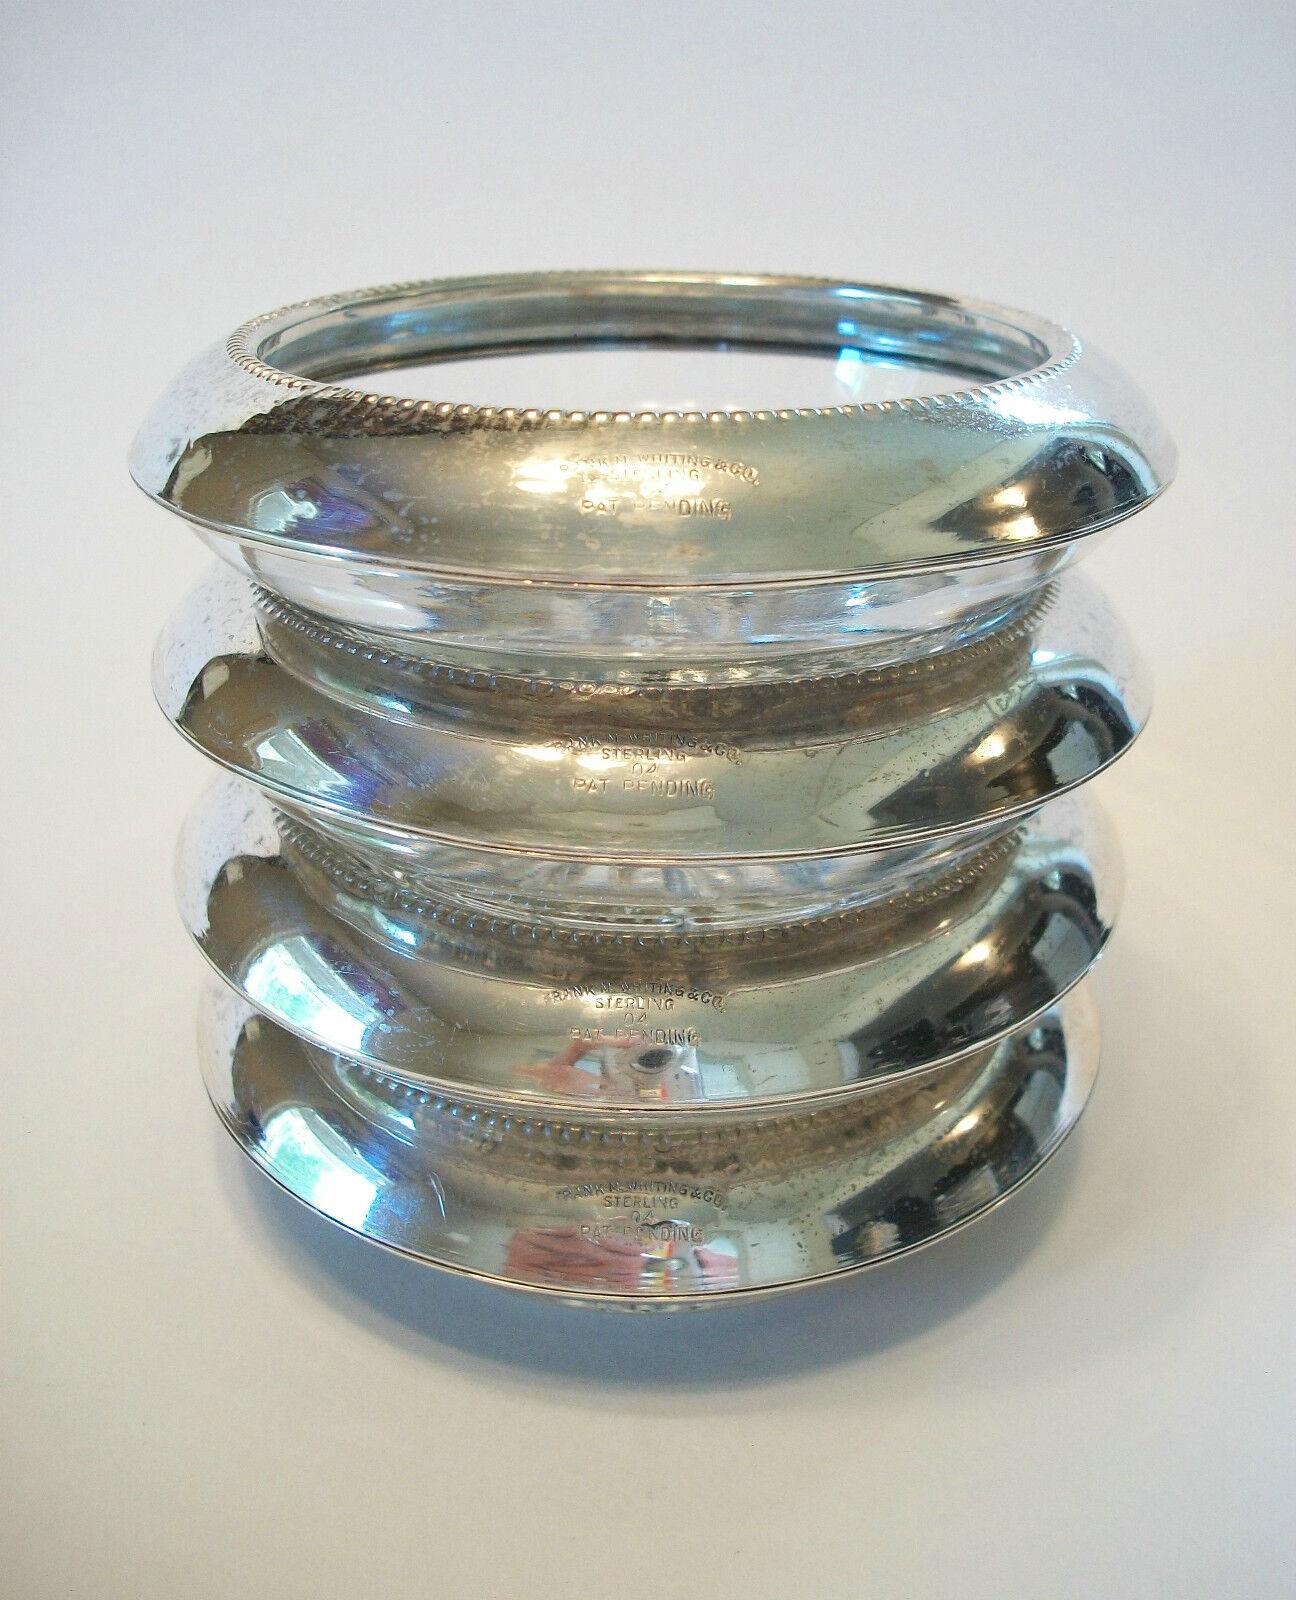 American Classical FRANK M. WHITING - 4 Sterling Silver & Glass Coasters - U.S. - Mid 20th Century For Sale